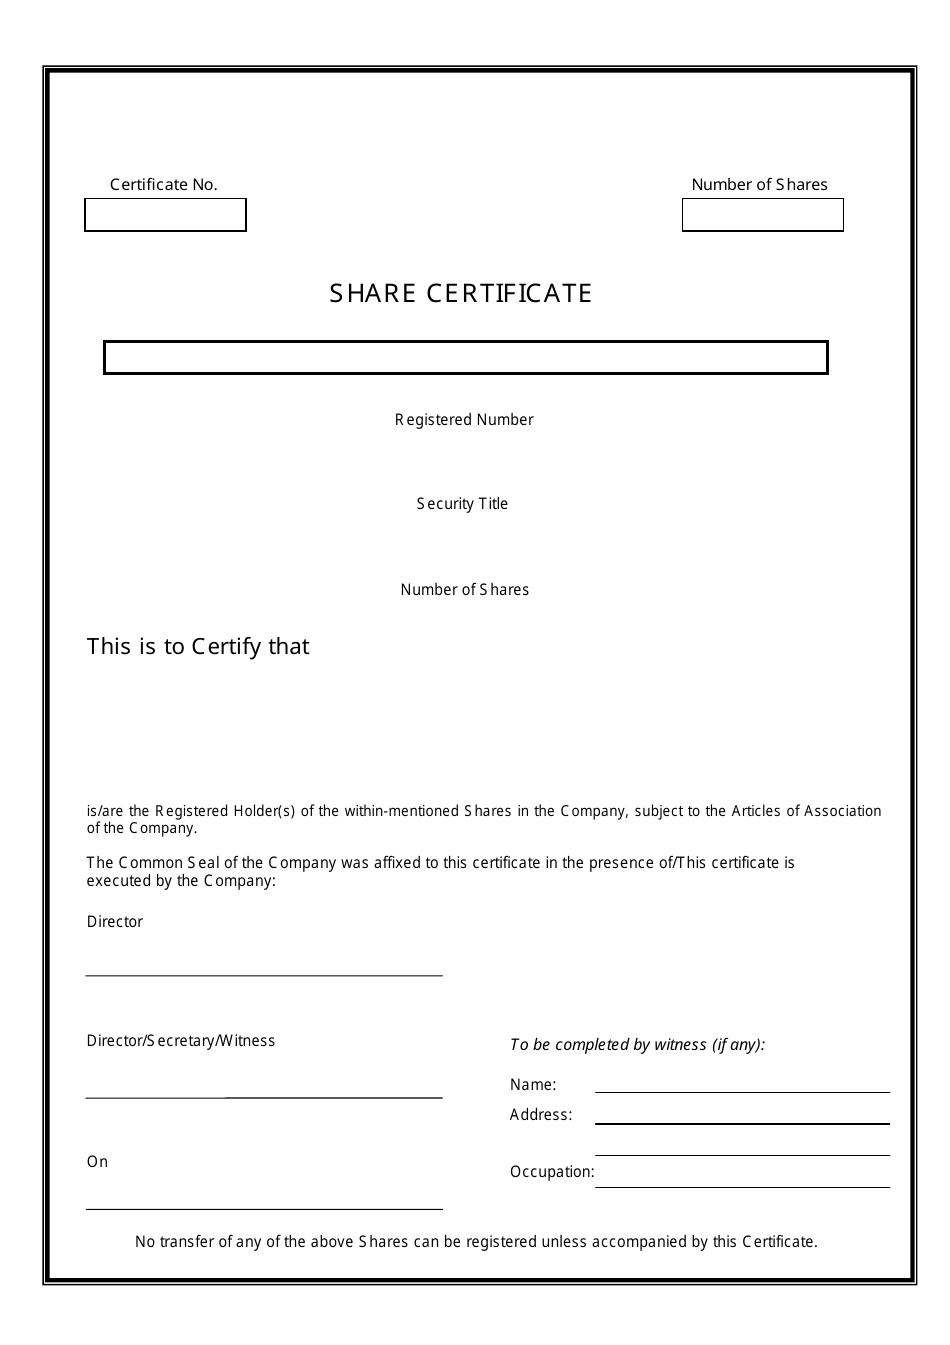 Share Certificate Form, Page 1